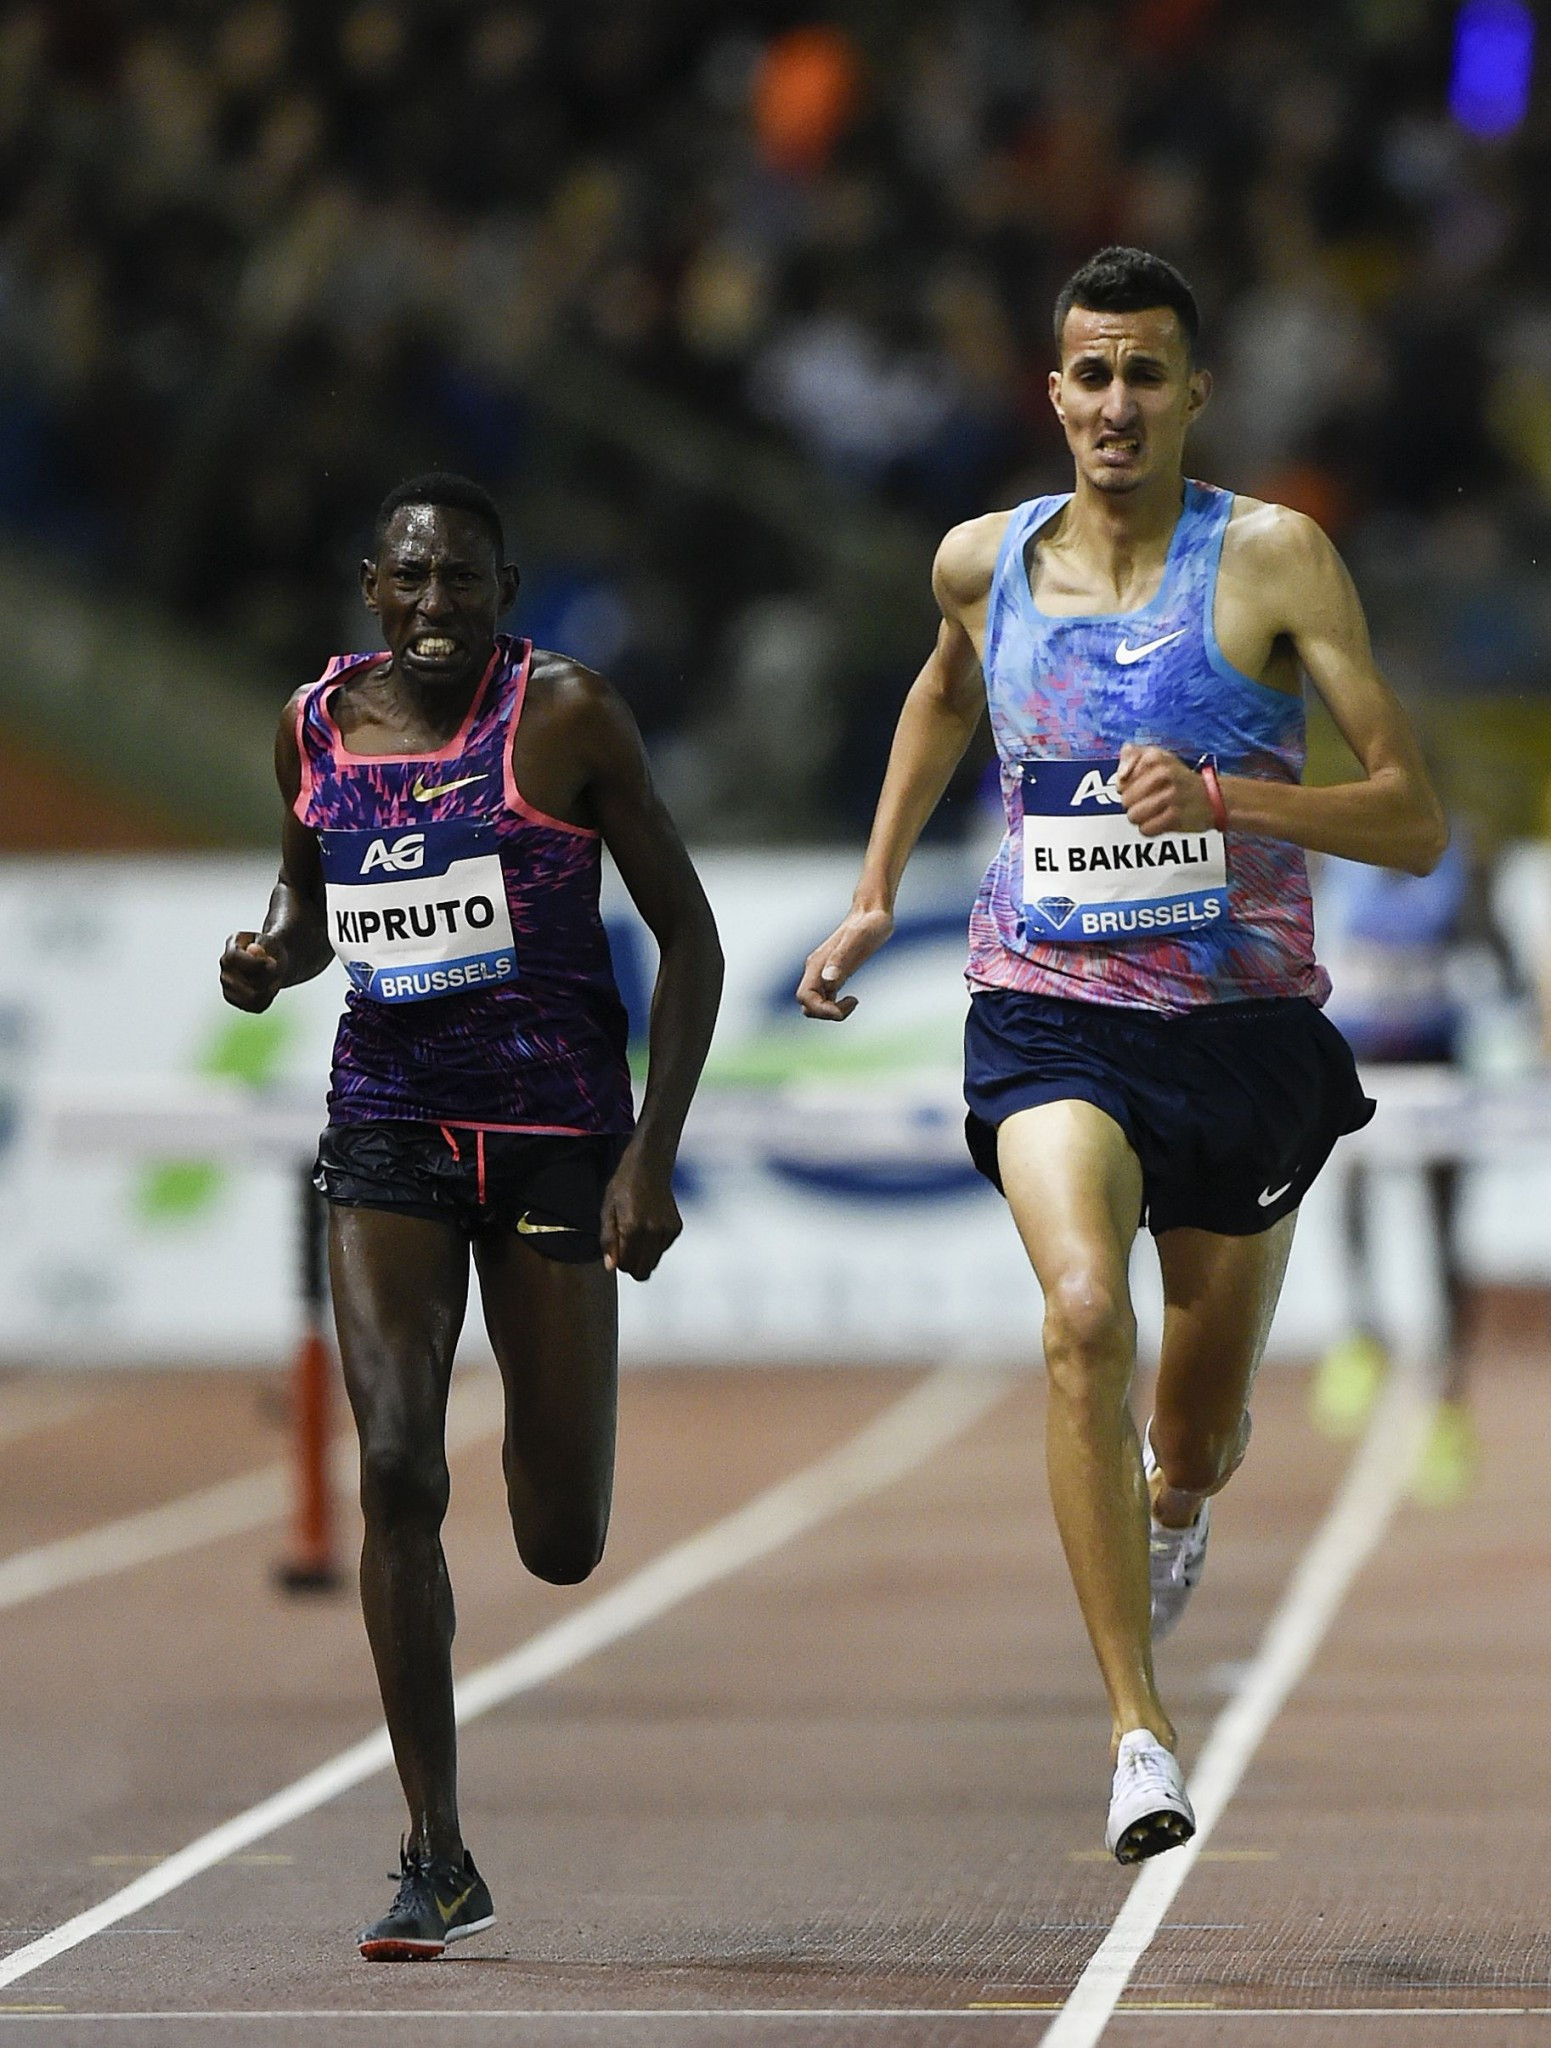 Kenya's world and Olympic 3,000m steeplechase champion Conseslus Kipruto chases down Morocco's Soufiane El Bakkali to win at the IAAF Diamond League final in Brussels tonight ©Getty Images